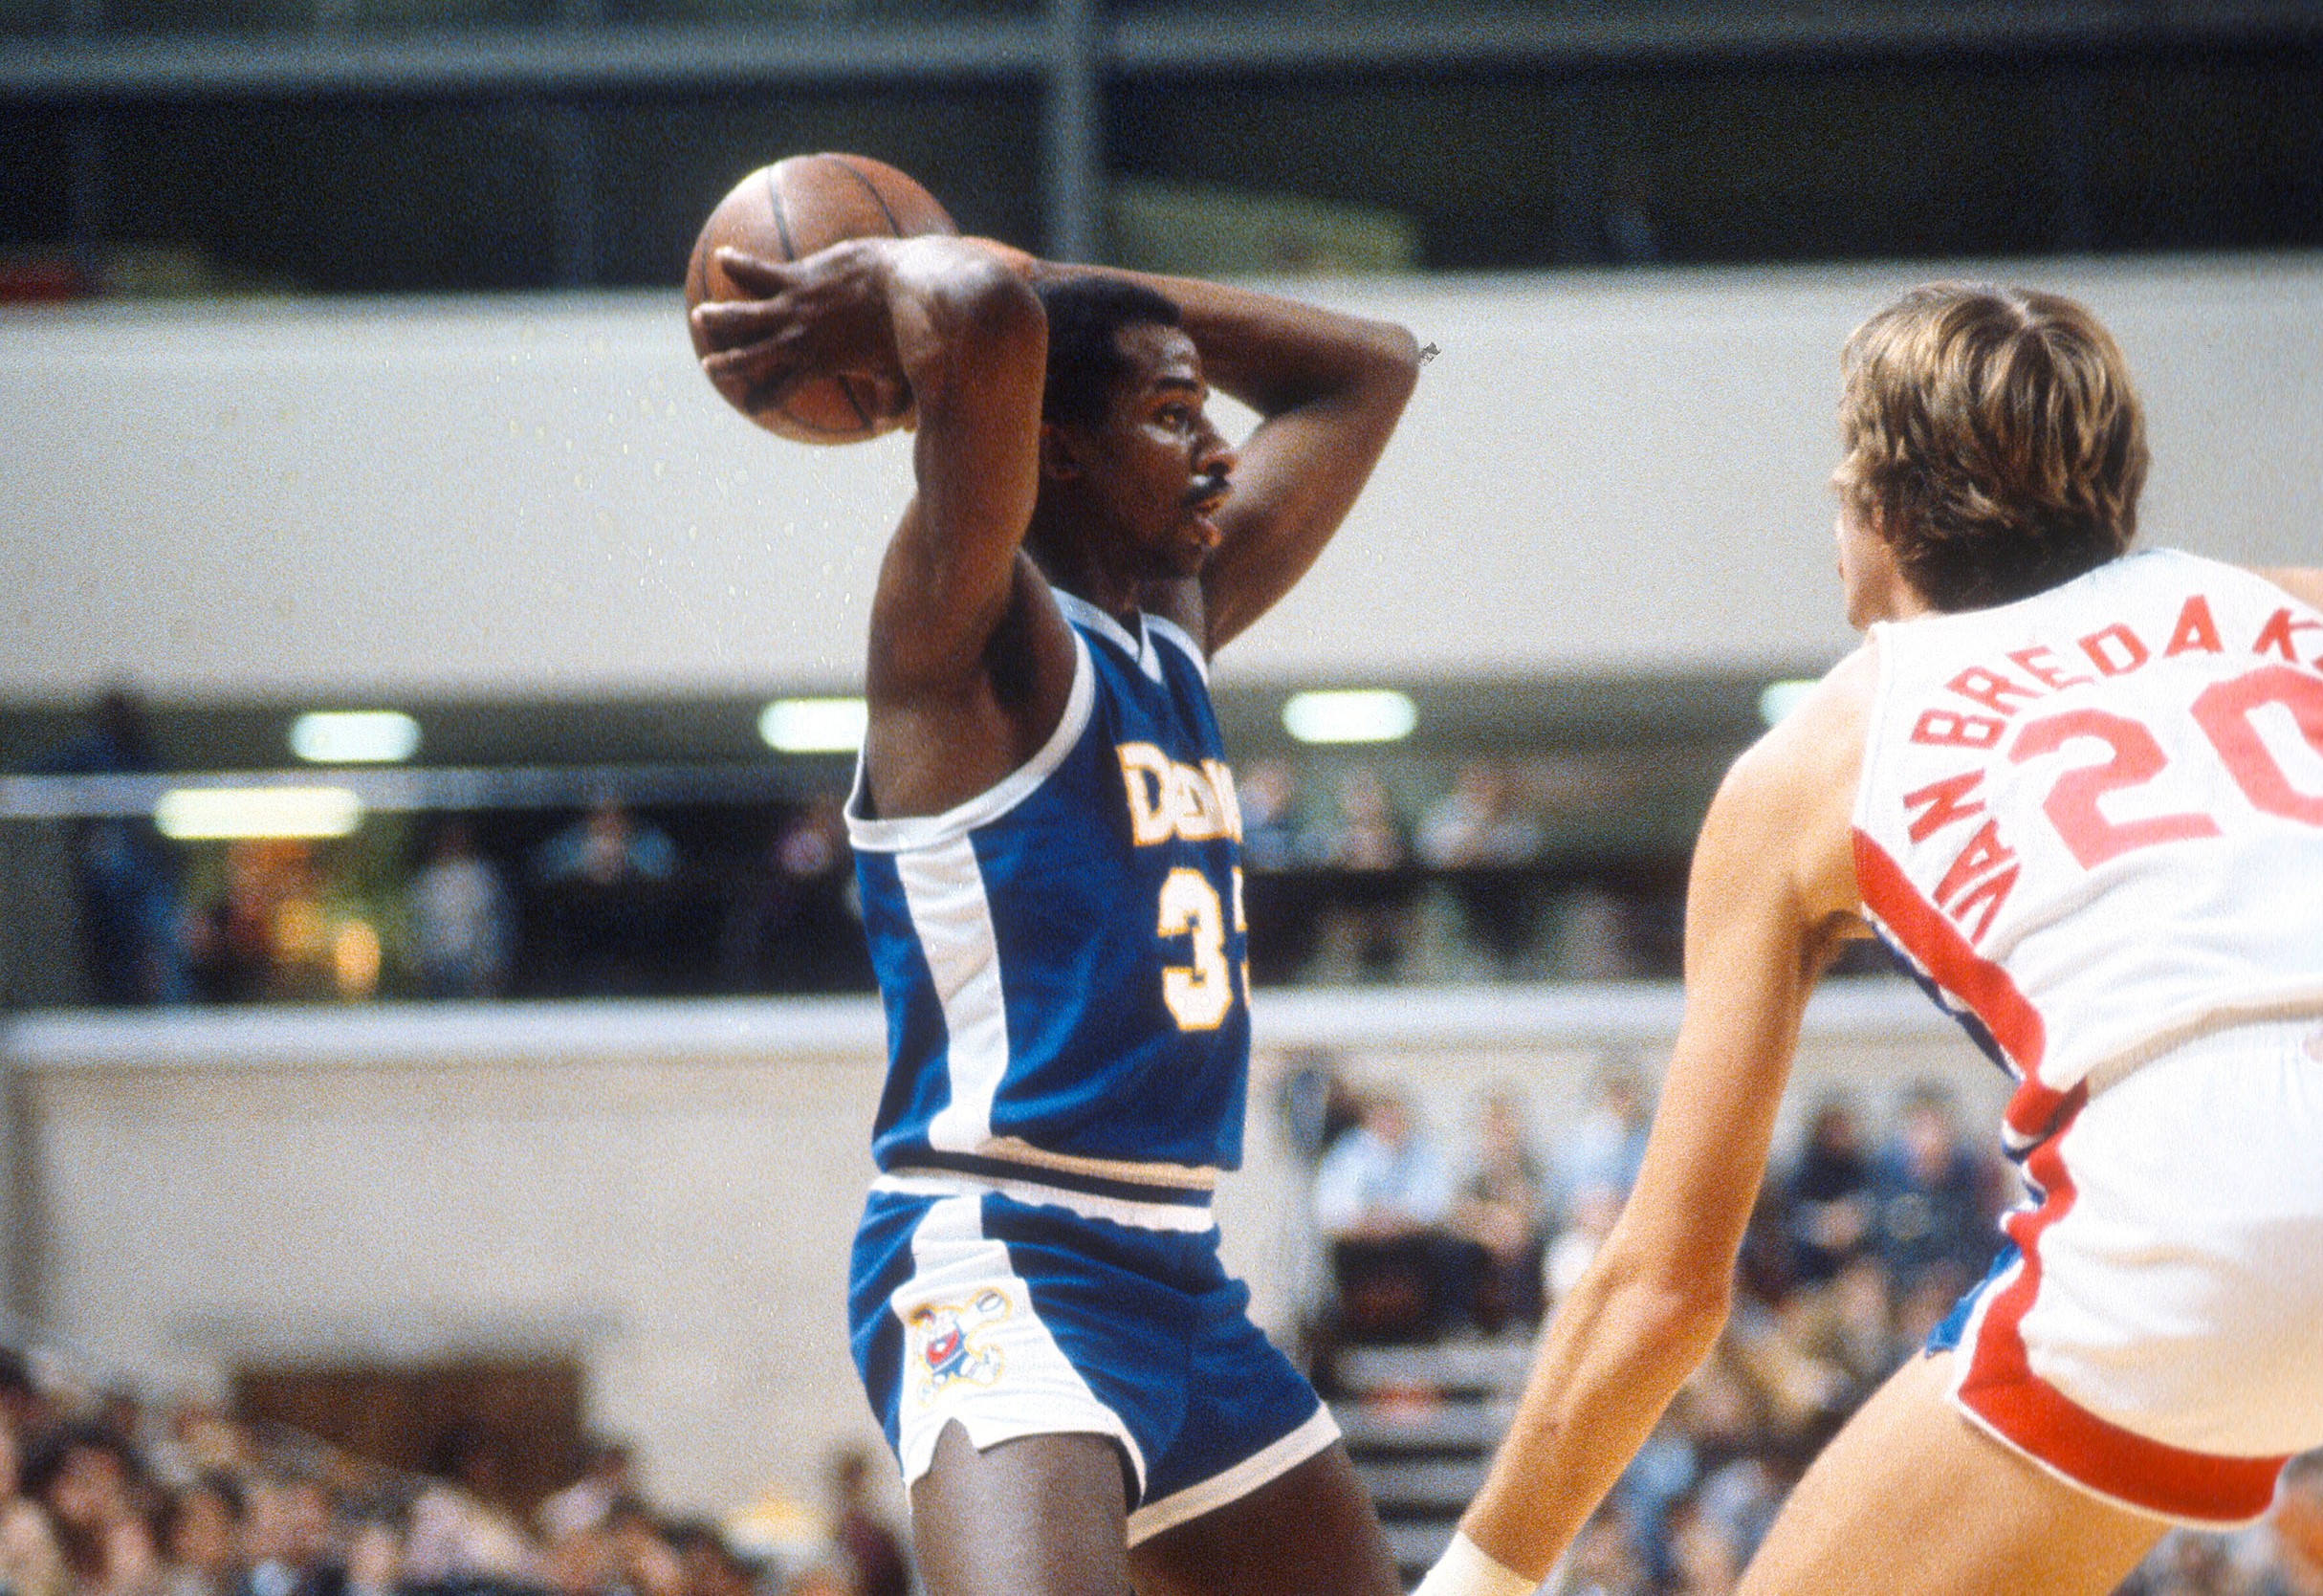 David Thompson of the Denver Nuggets looks to pass the ball over Jan van Breda Kolff of the New Jersey Nets.